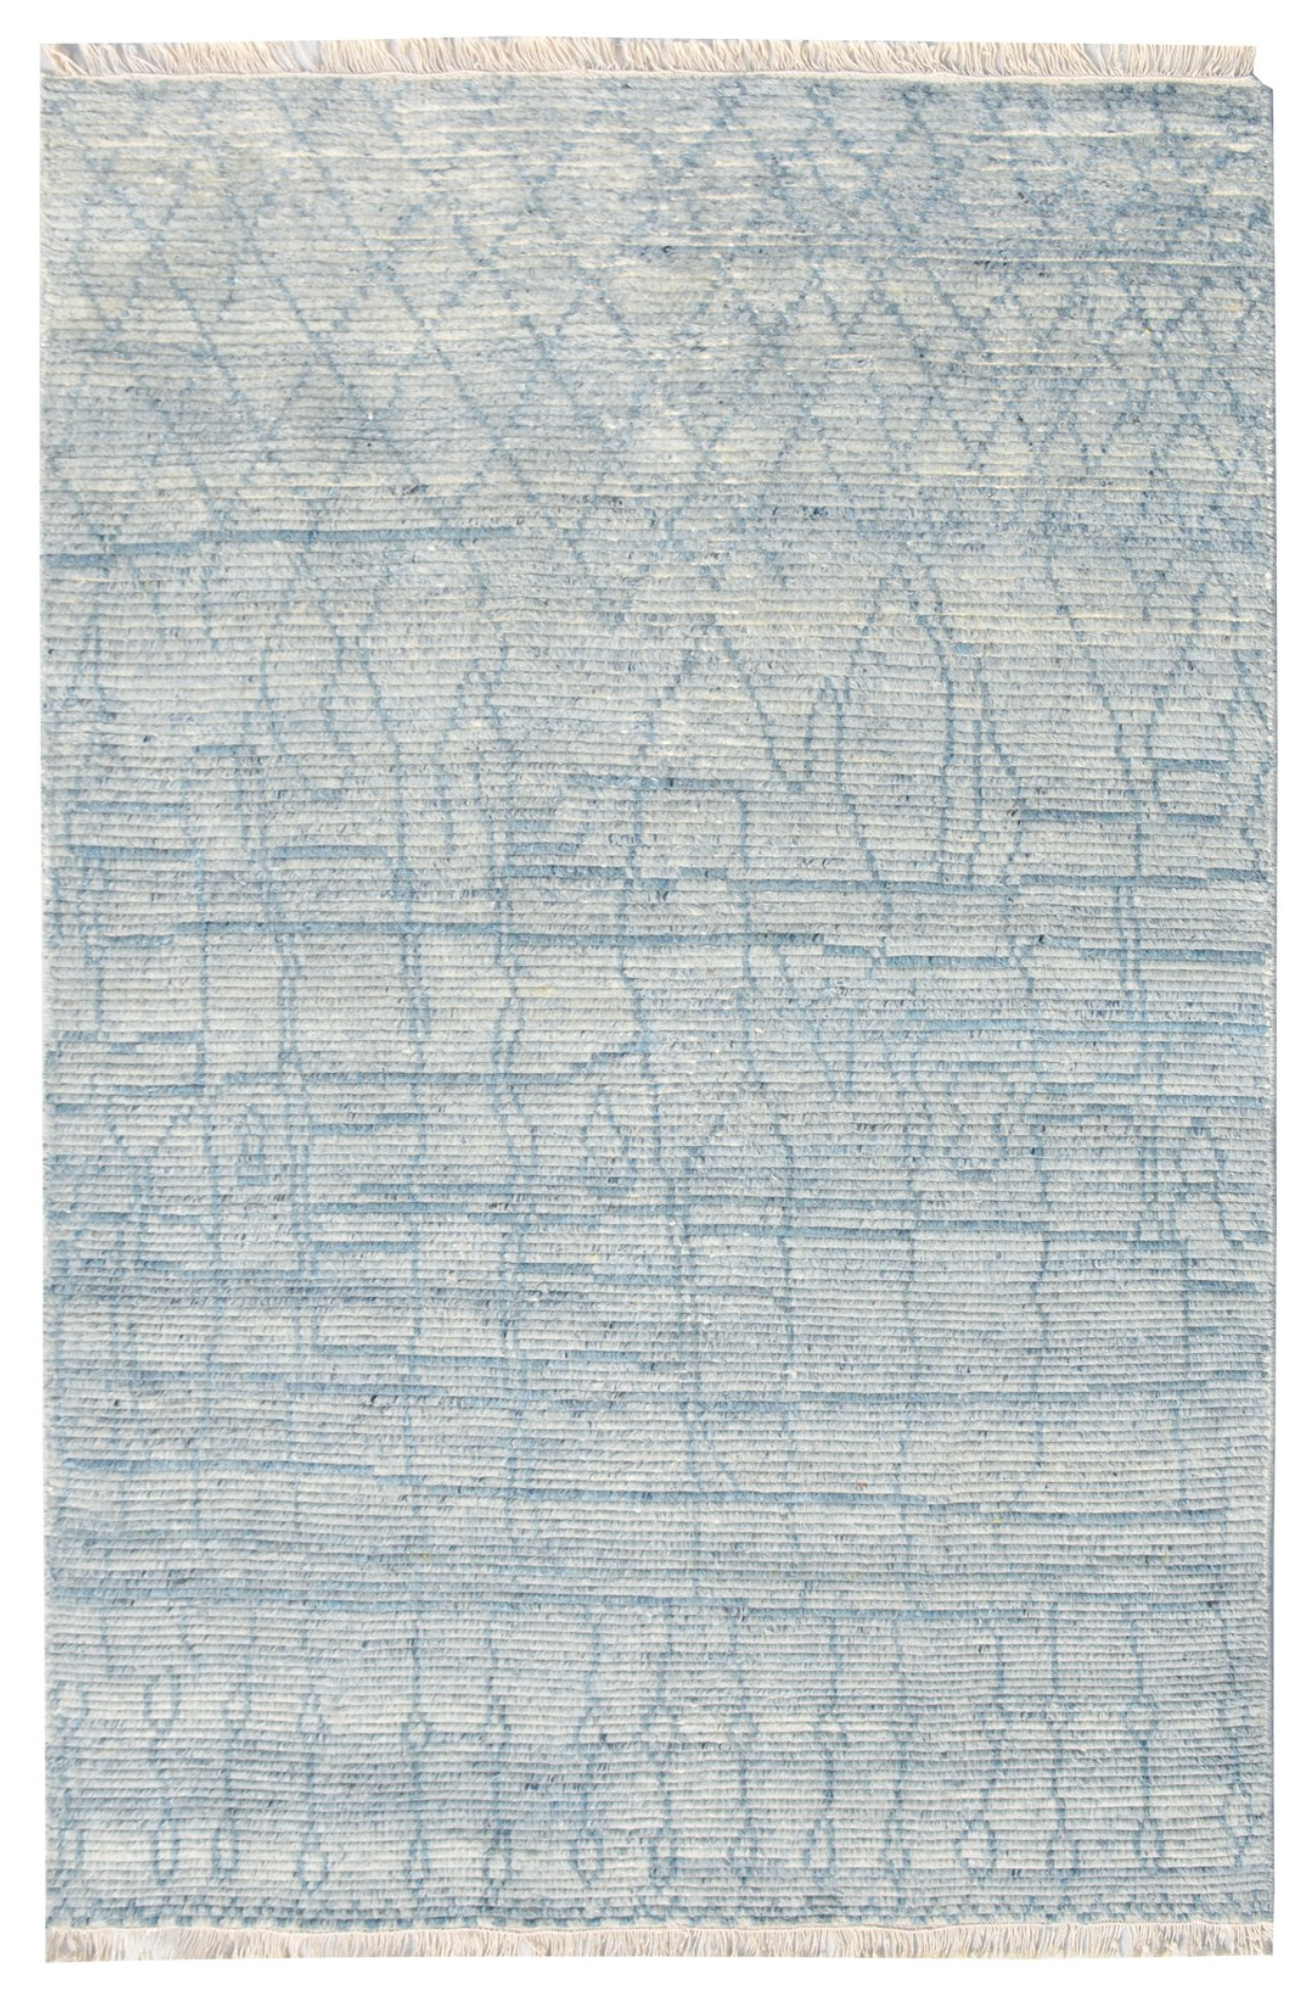 Rug # 31410, Hand knotted modern rug , 100% handspun wool pile, inspired by Morrocan berber designer rgs. Woven in noerthen India, , size 240x160 cm (1) - Copy